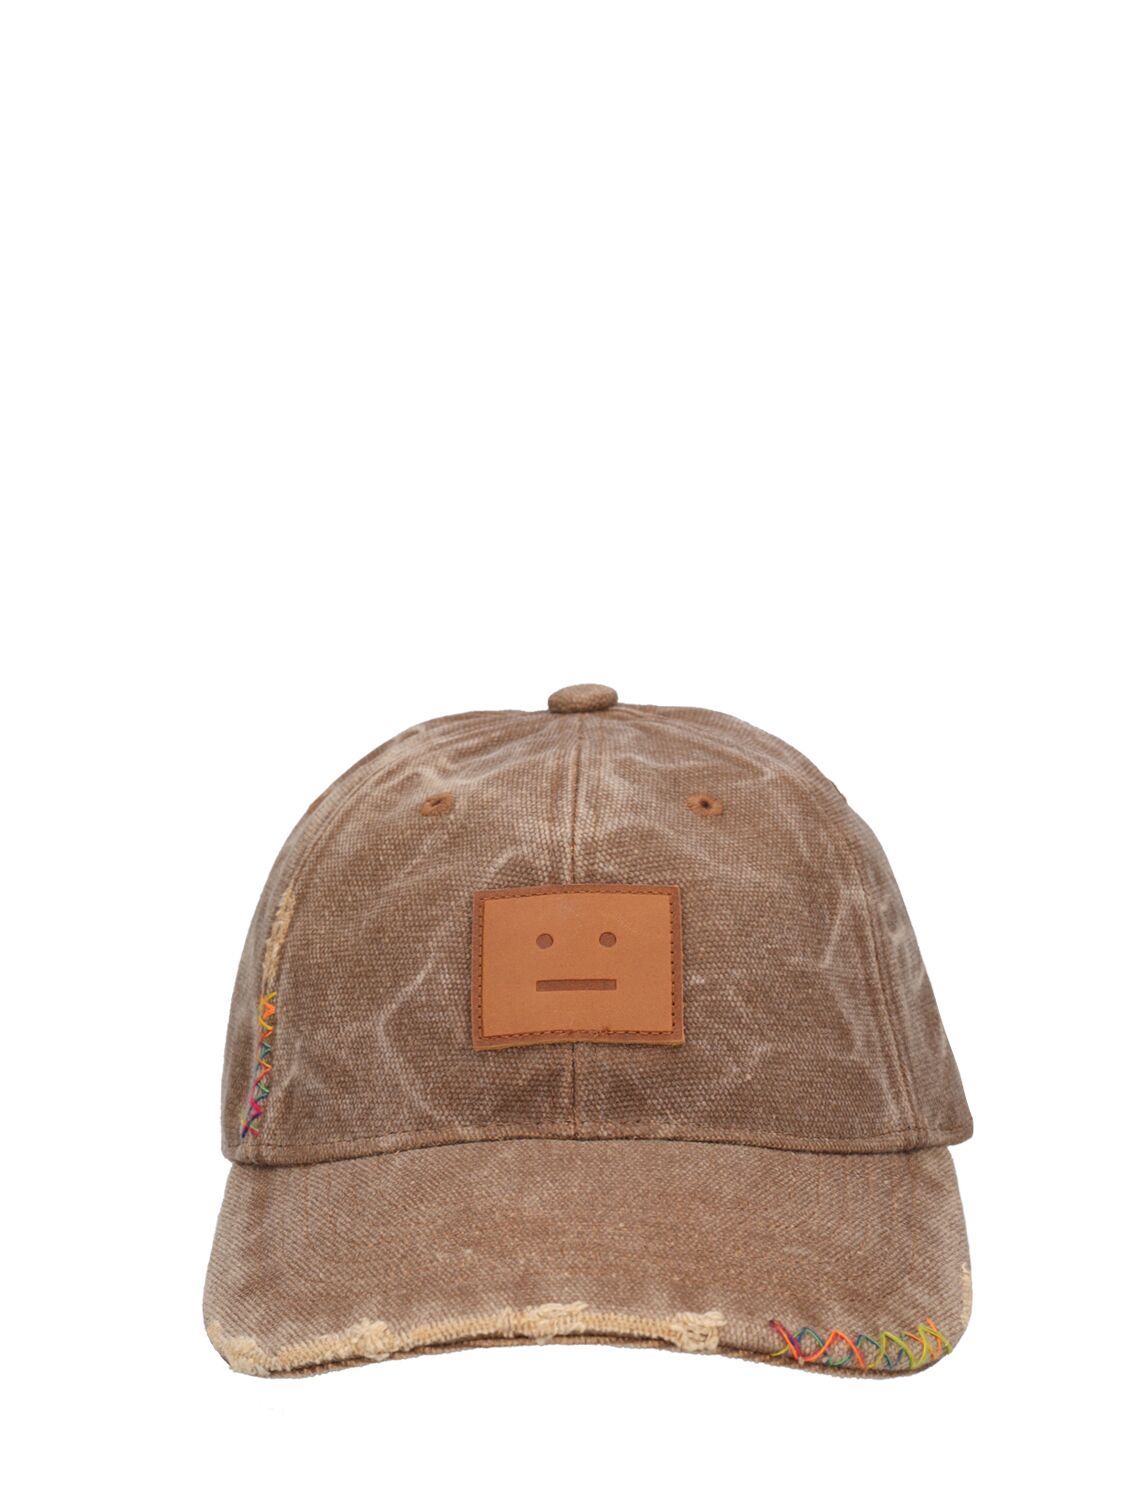 Acne Studios Cunov Distressed Canvas Baseball Hat In Toffee Brown